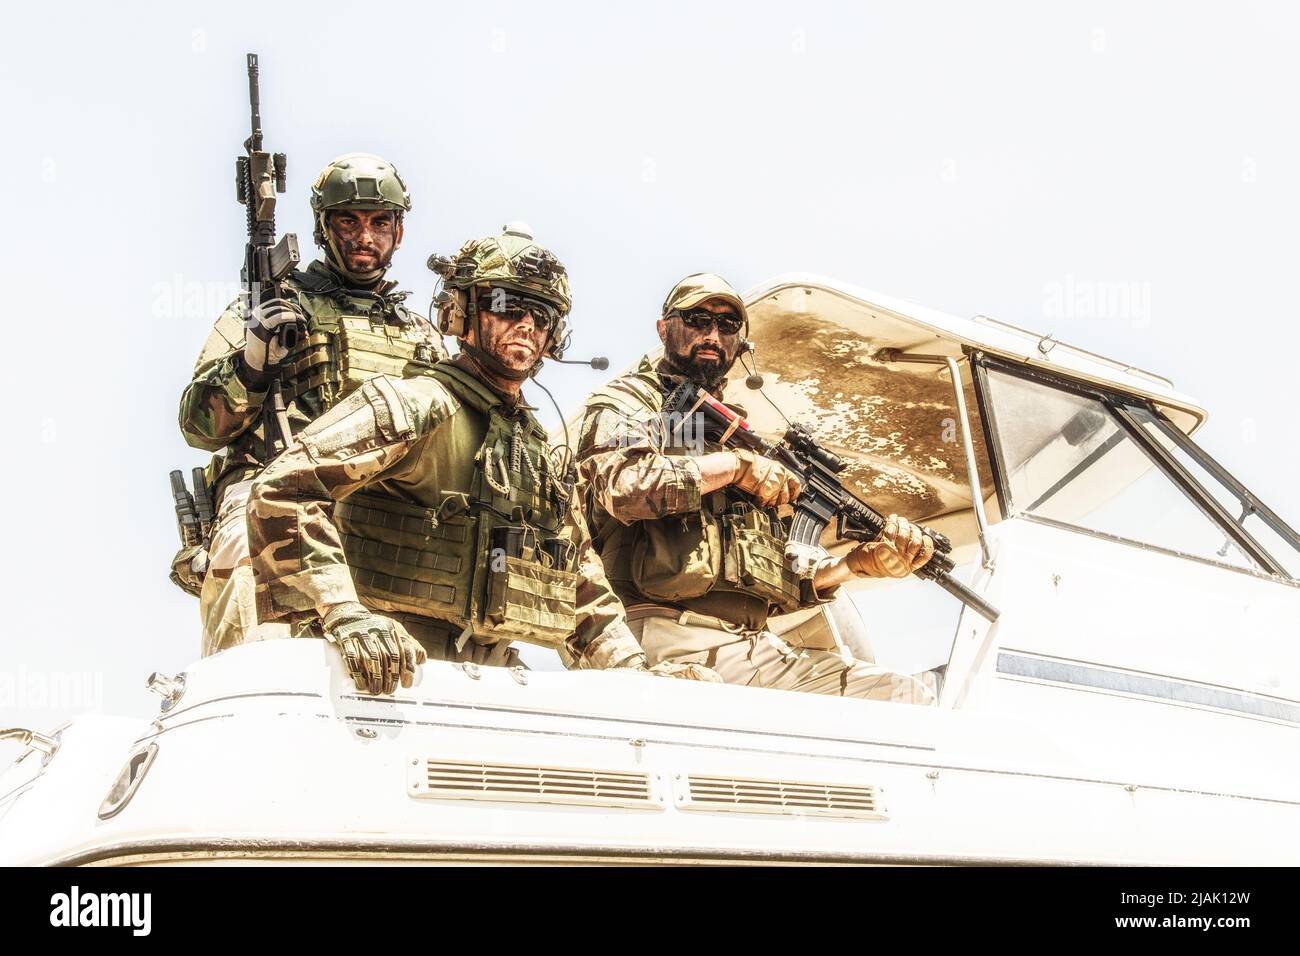 Navy SEALs standing together on stern of speed boat. Stock Photo